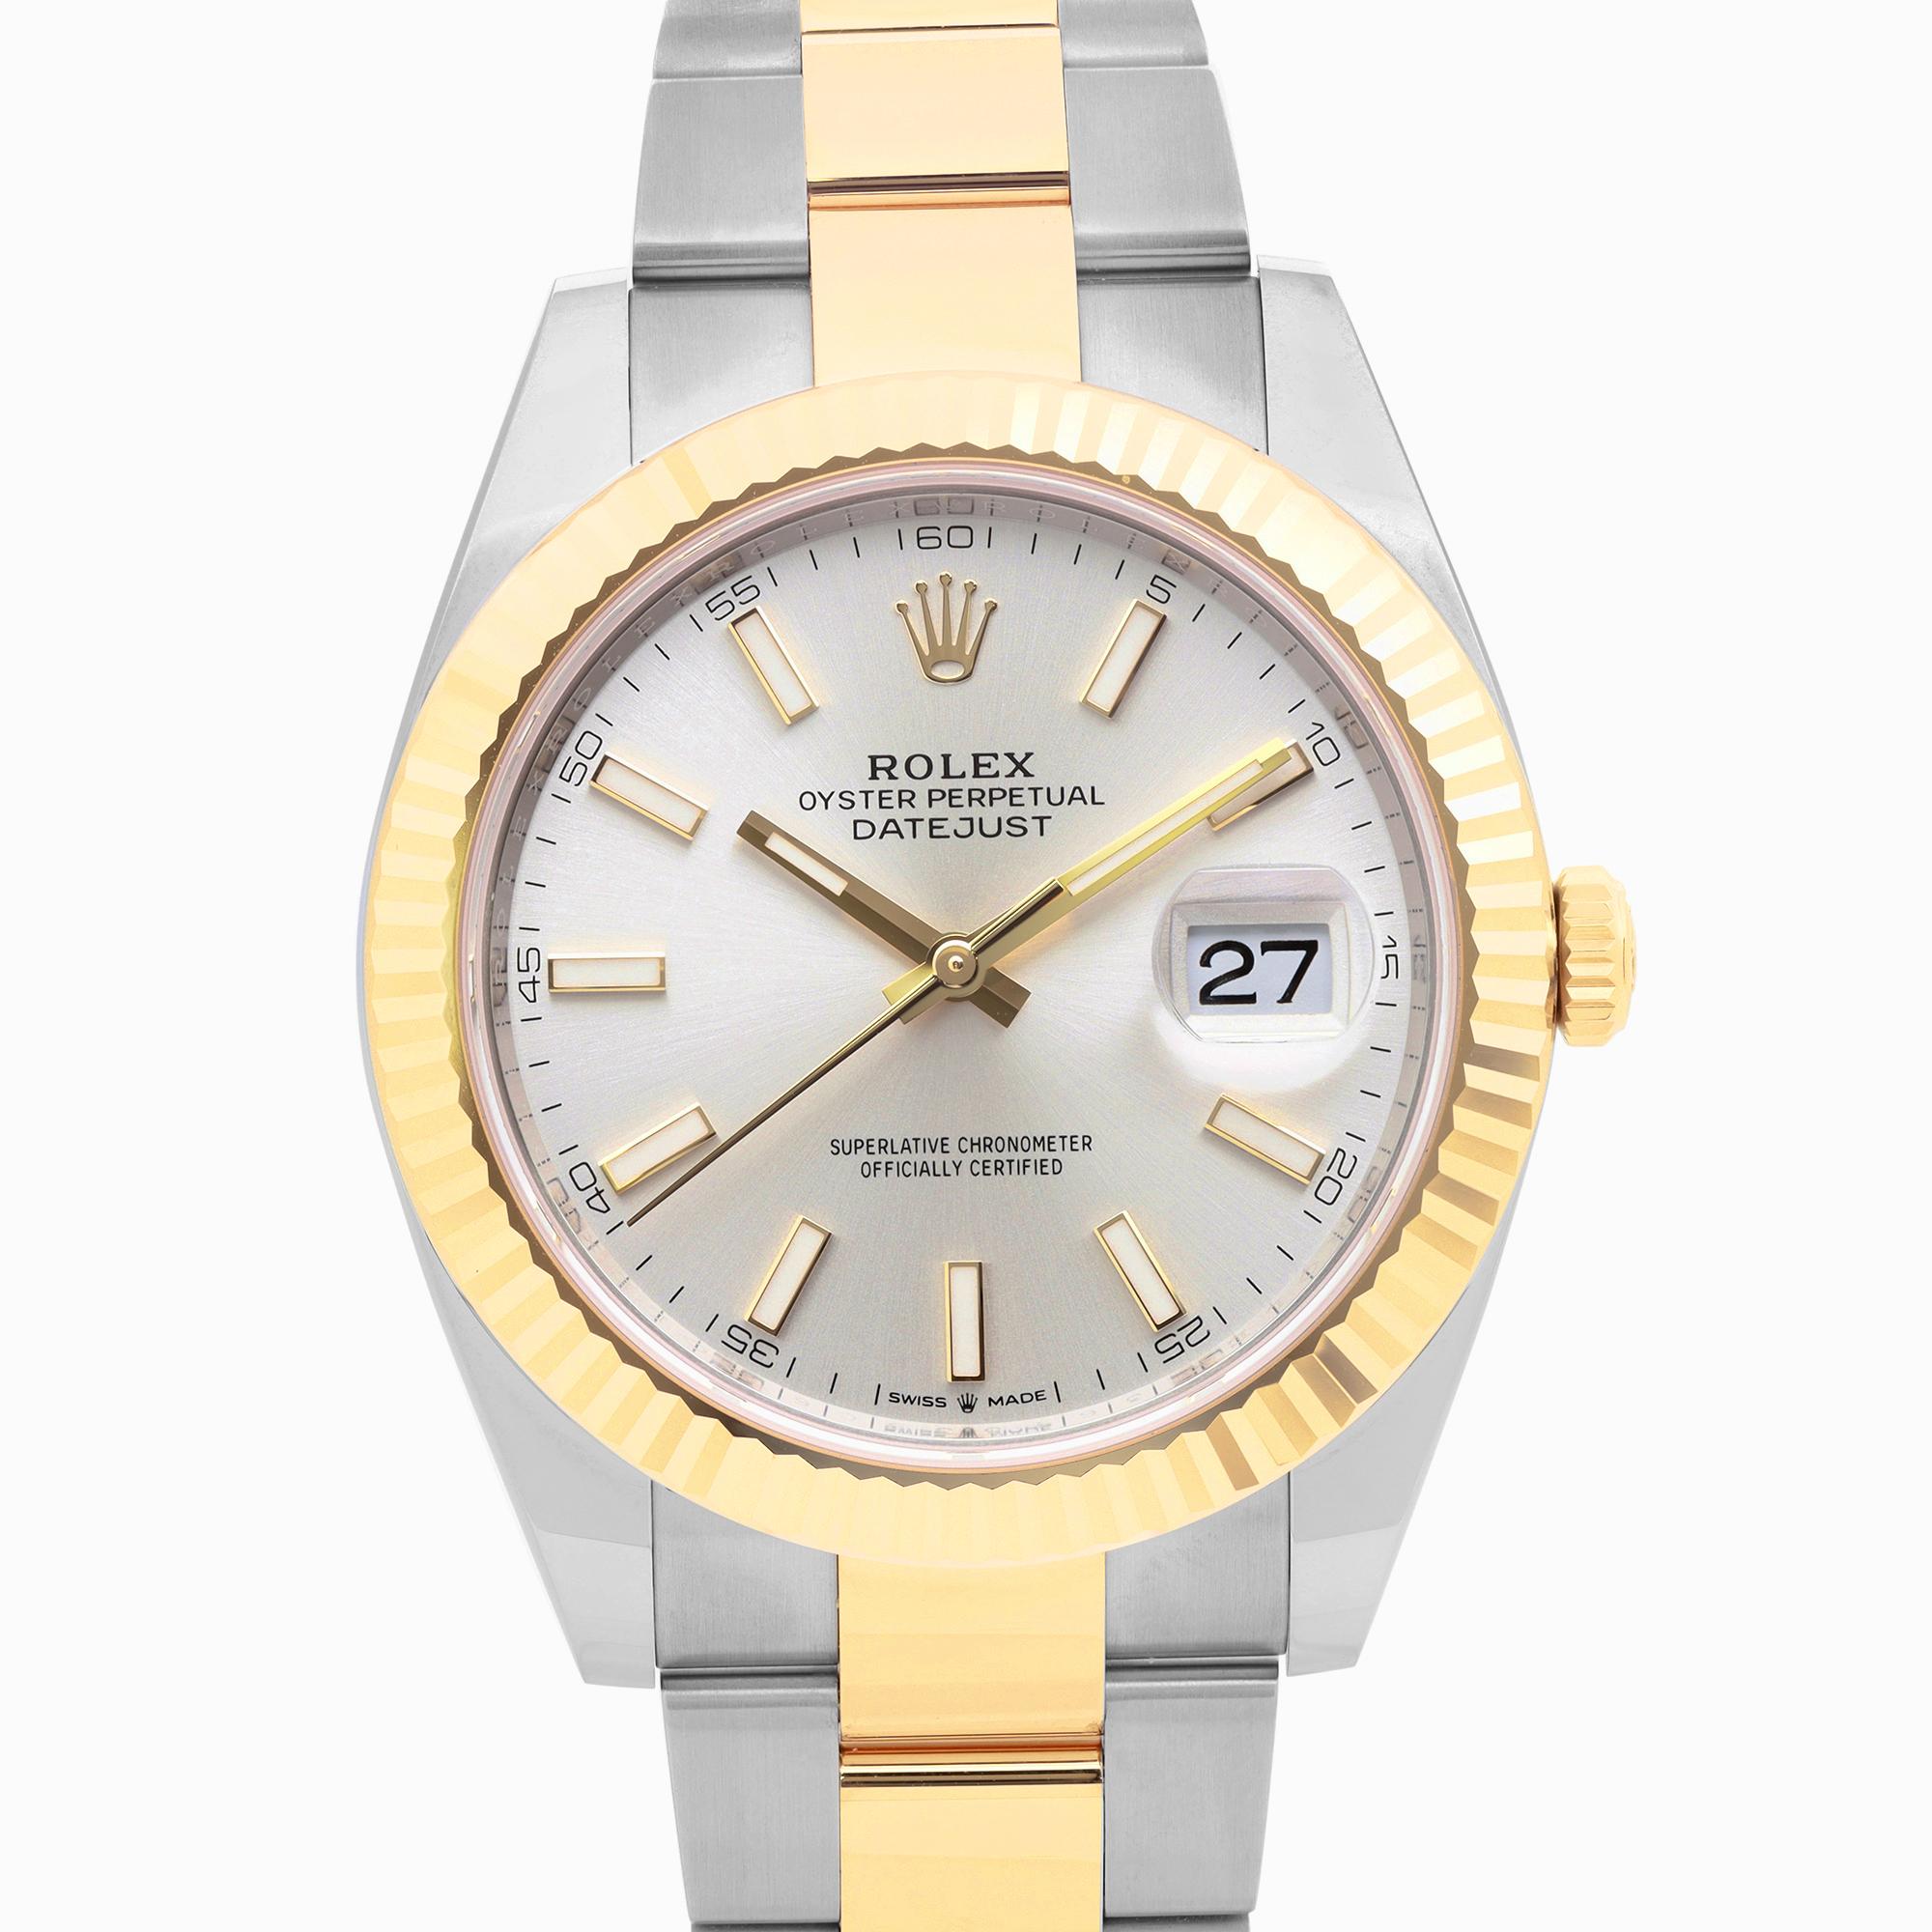 Unworn watch. Comes with the original box and papers.

Brand: Rolex
Model Number: 126333
Department: Men
Country/Region of Manufacture: Switzerland
Style: Dress/Formal, Luxury
Model Name: Rolex Datejust 41
Vintage: No

Movement:
Type: Mechanical